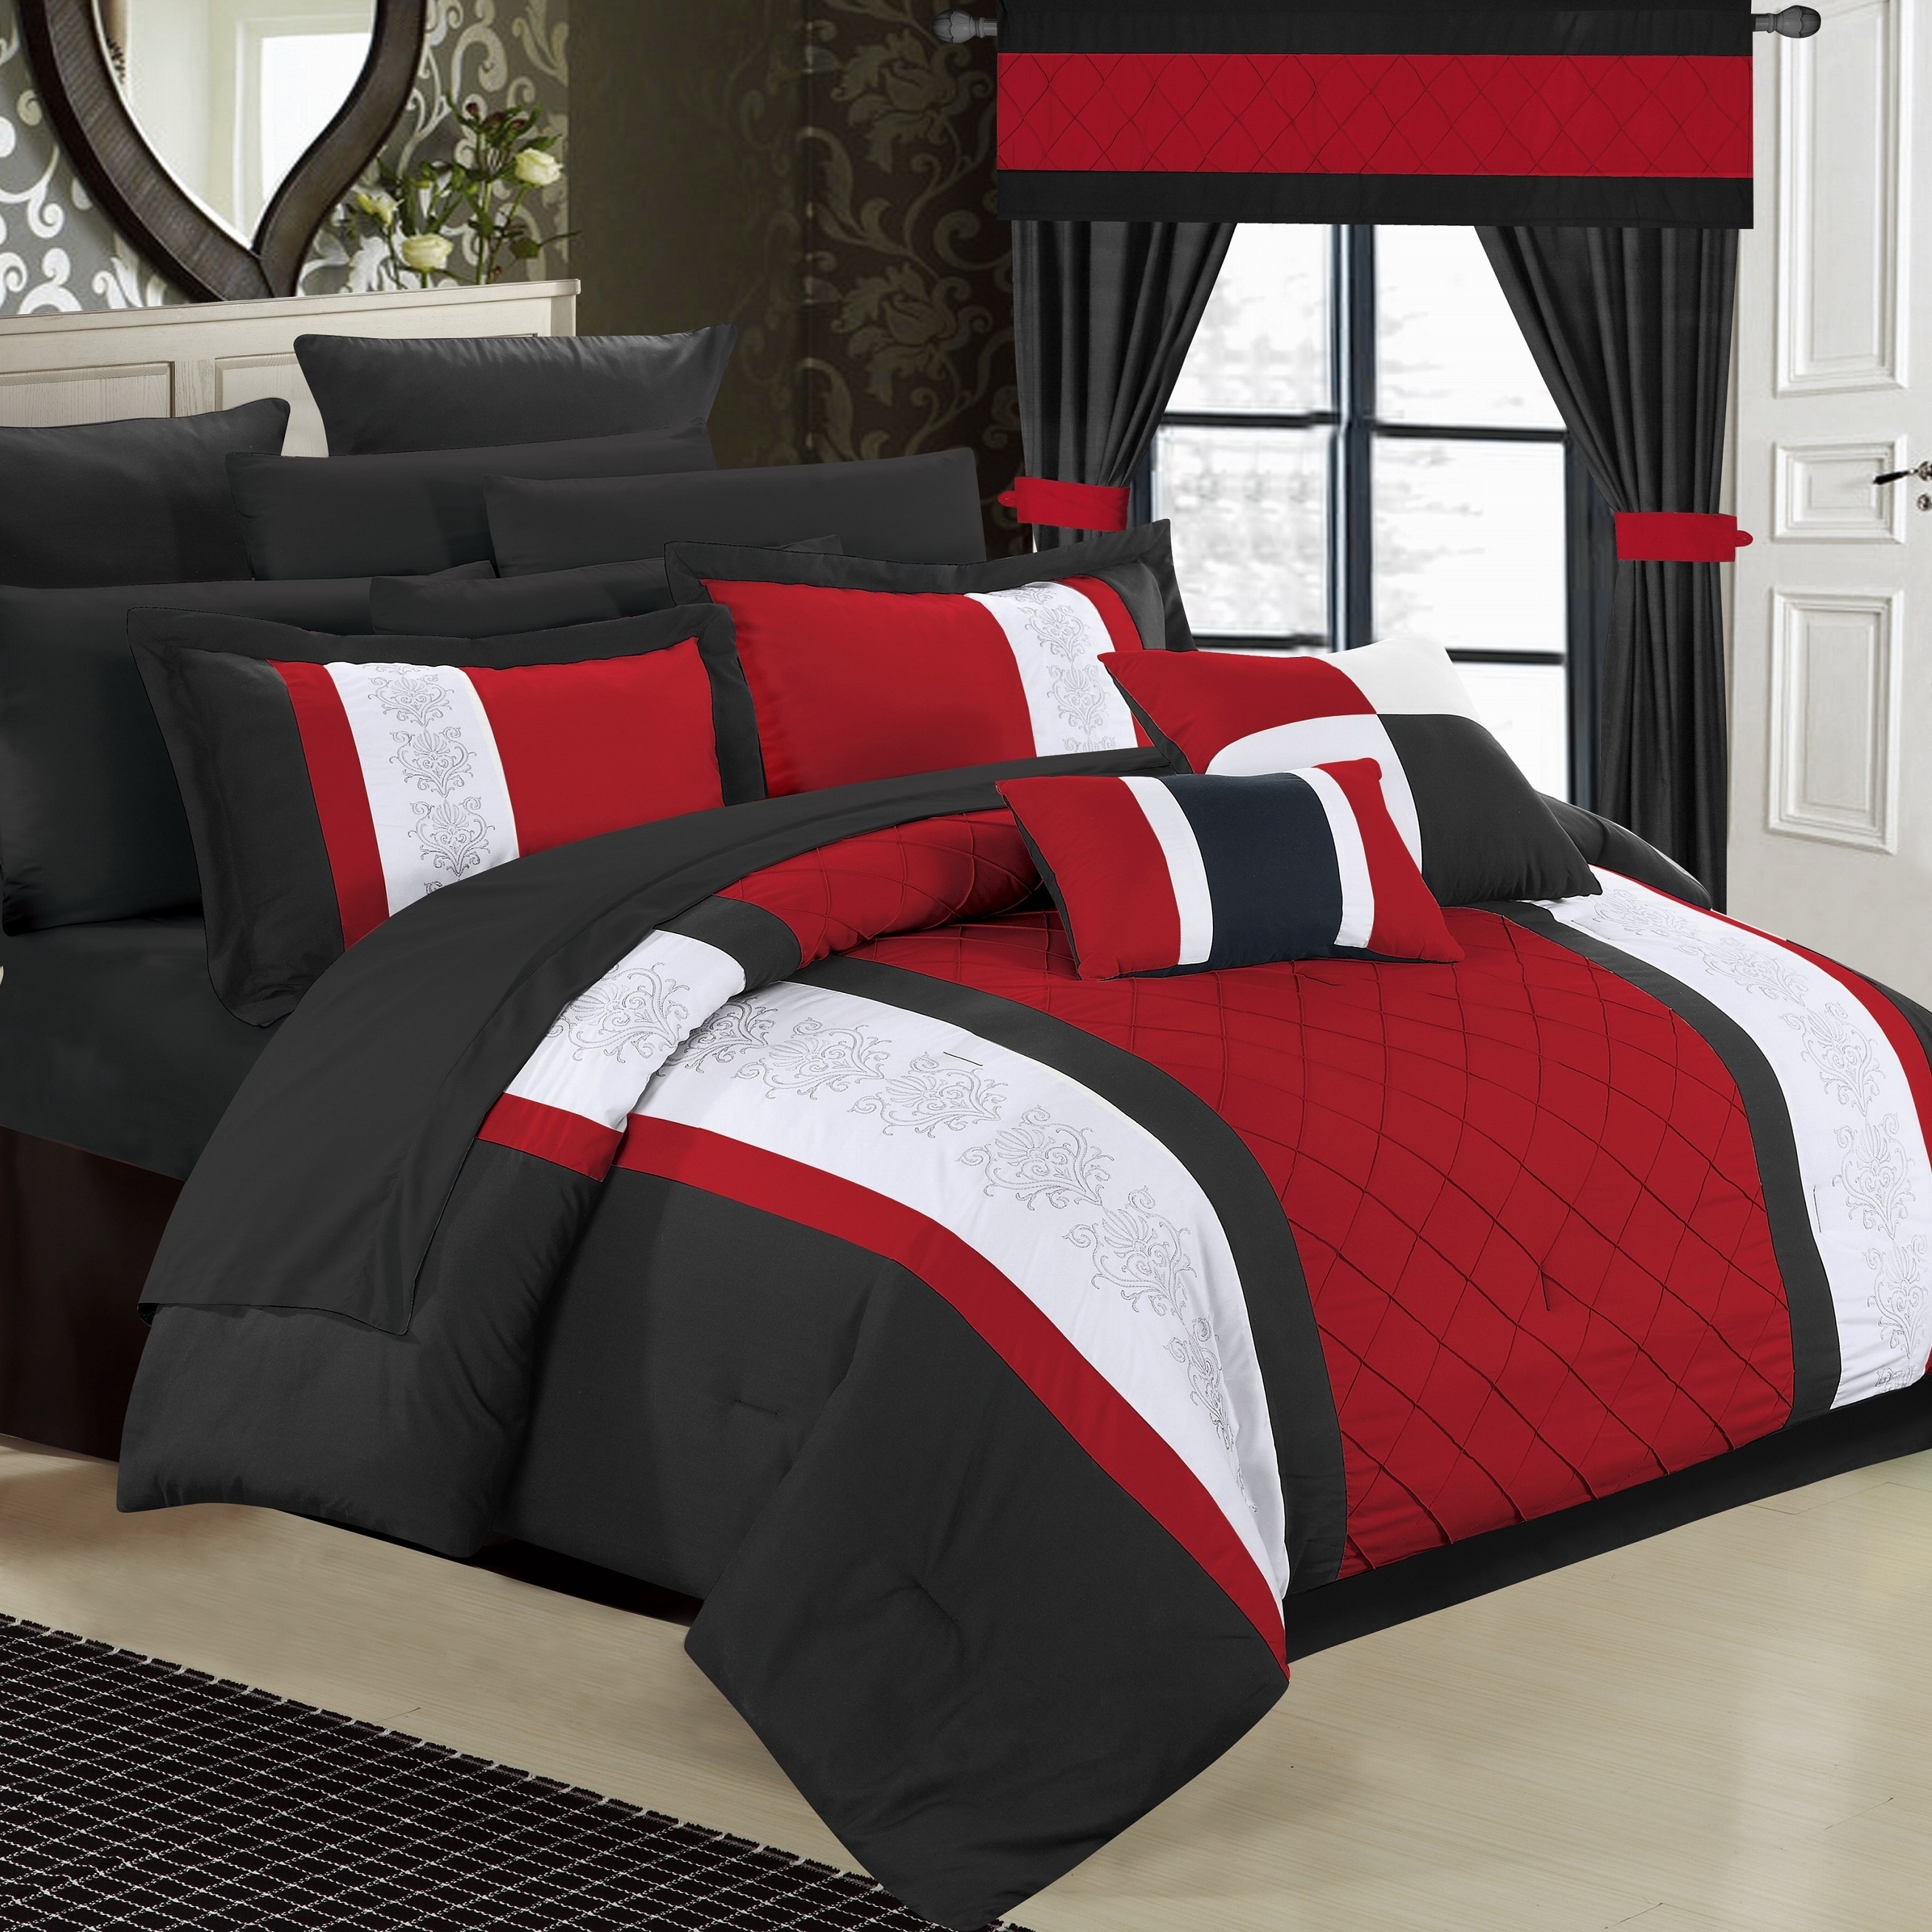 24 Piece Marlington Complete Pin Tuck Embroidery Bedding Comforter Set - Red, Queen